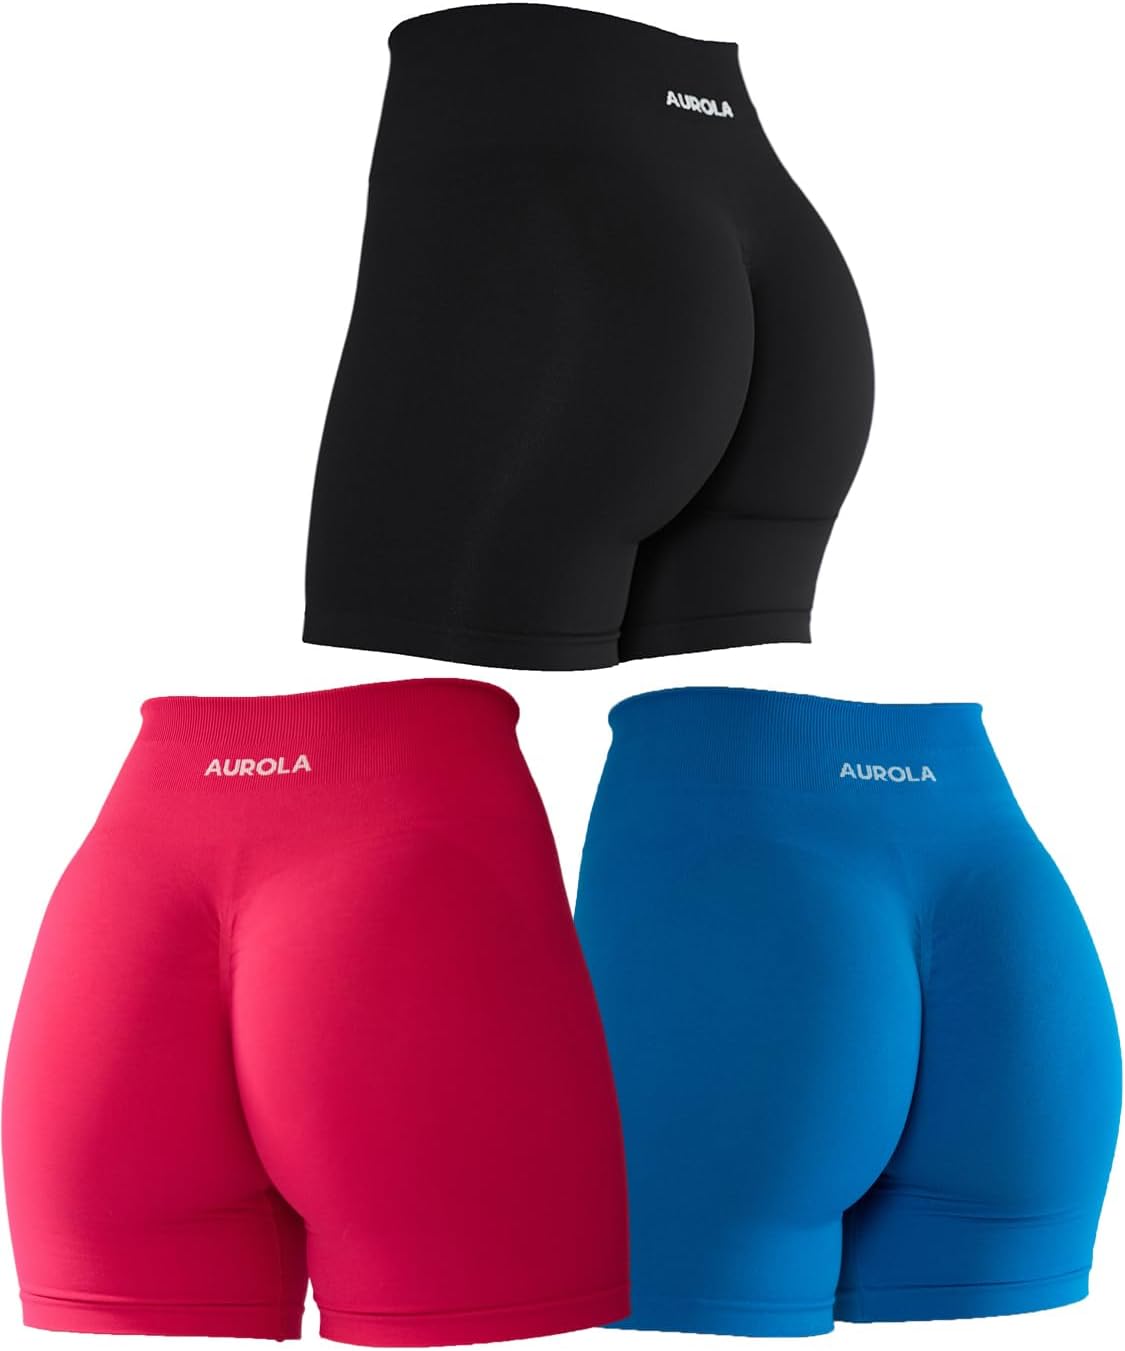 AUROLA Intensify Short Women's Athletic Seamless High Waisted Running  Sporty Gym Fitness Yoga Elastic Workout Shorts 3.6 - ShopStyle